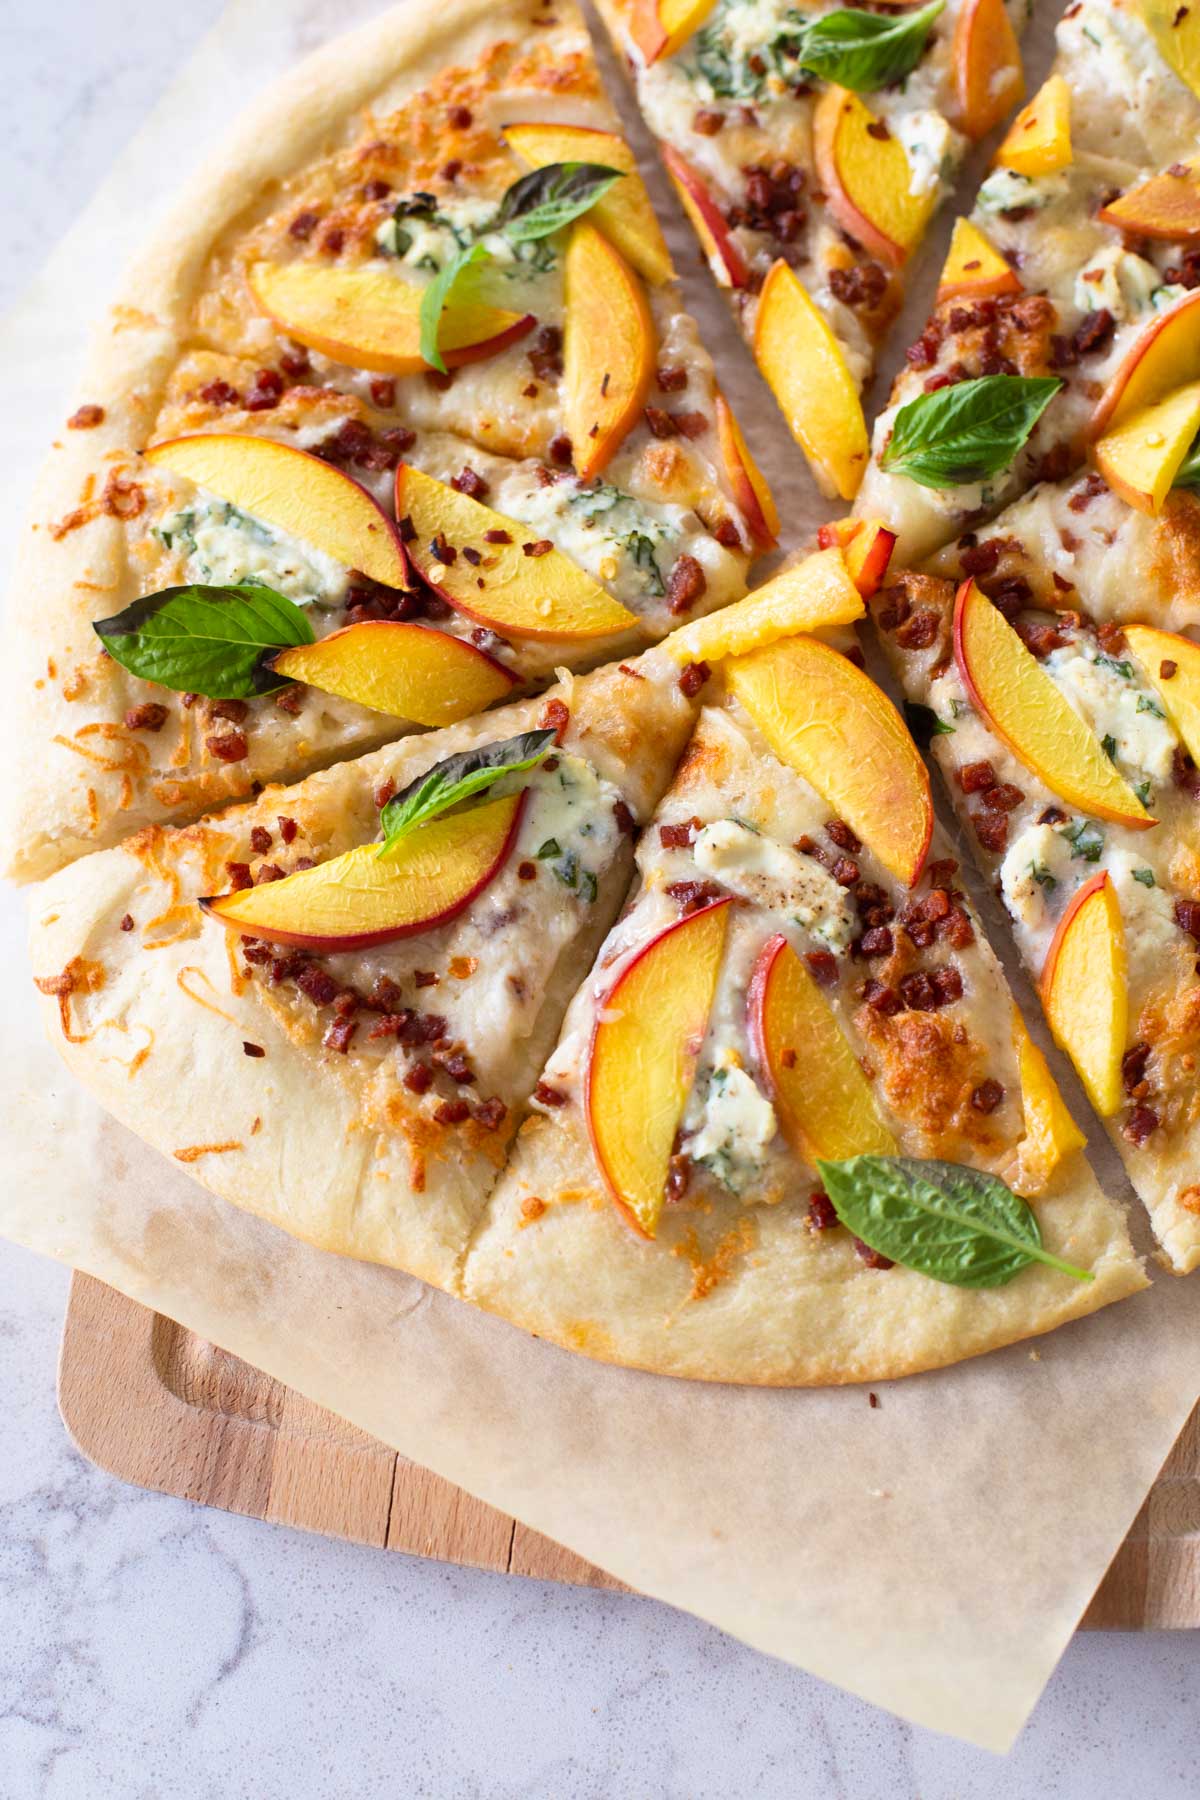 The peach pizza has been baked and sliced for serving.